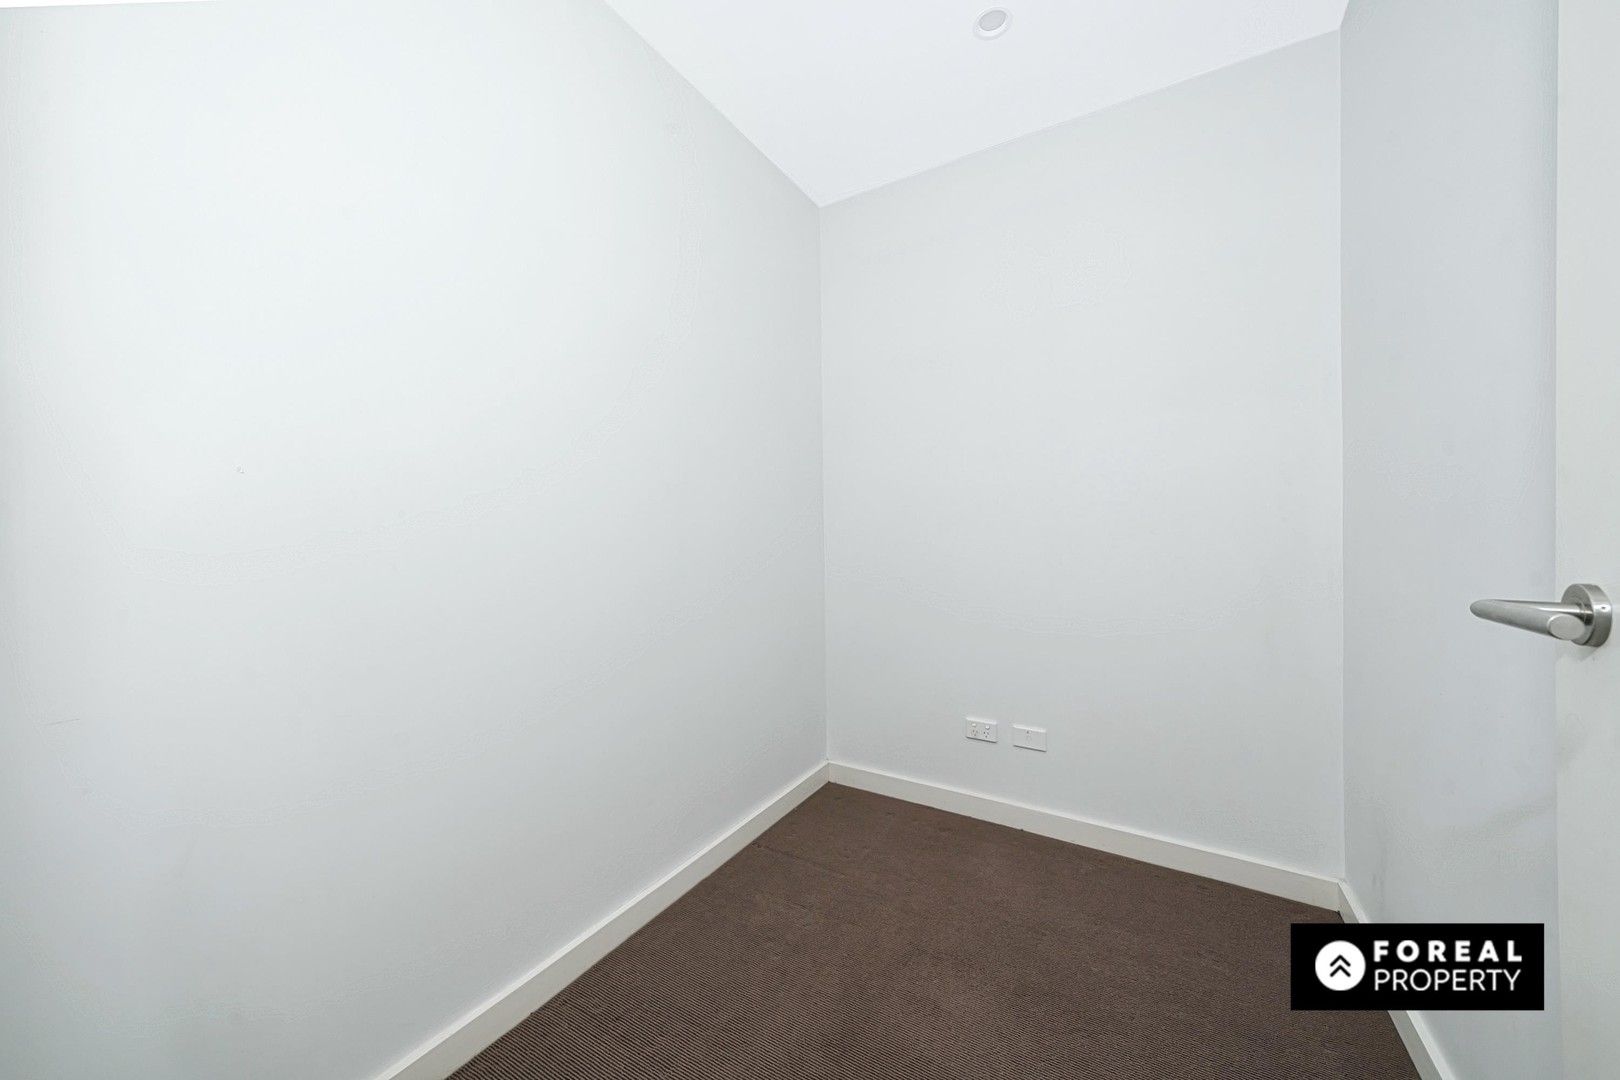 2 bedrooms New Apartments / Off the Plan in 387 Macquarie Street LIVERPOOL NSW, 2170